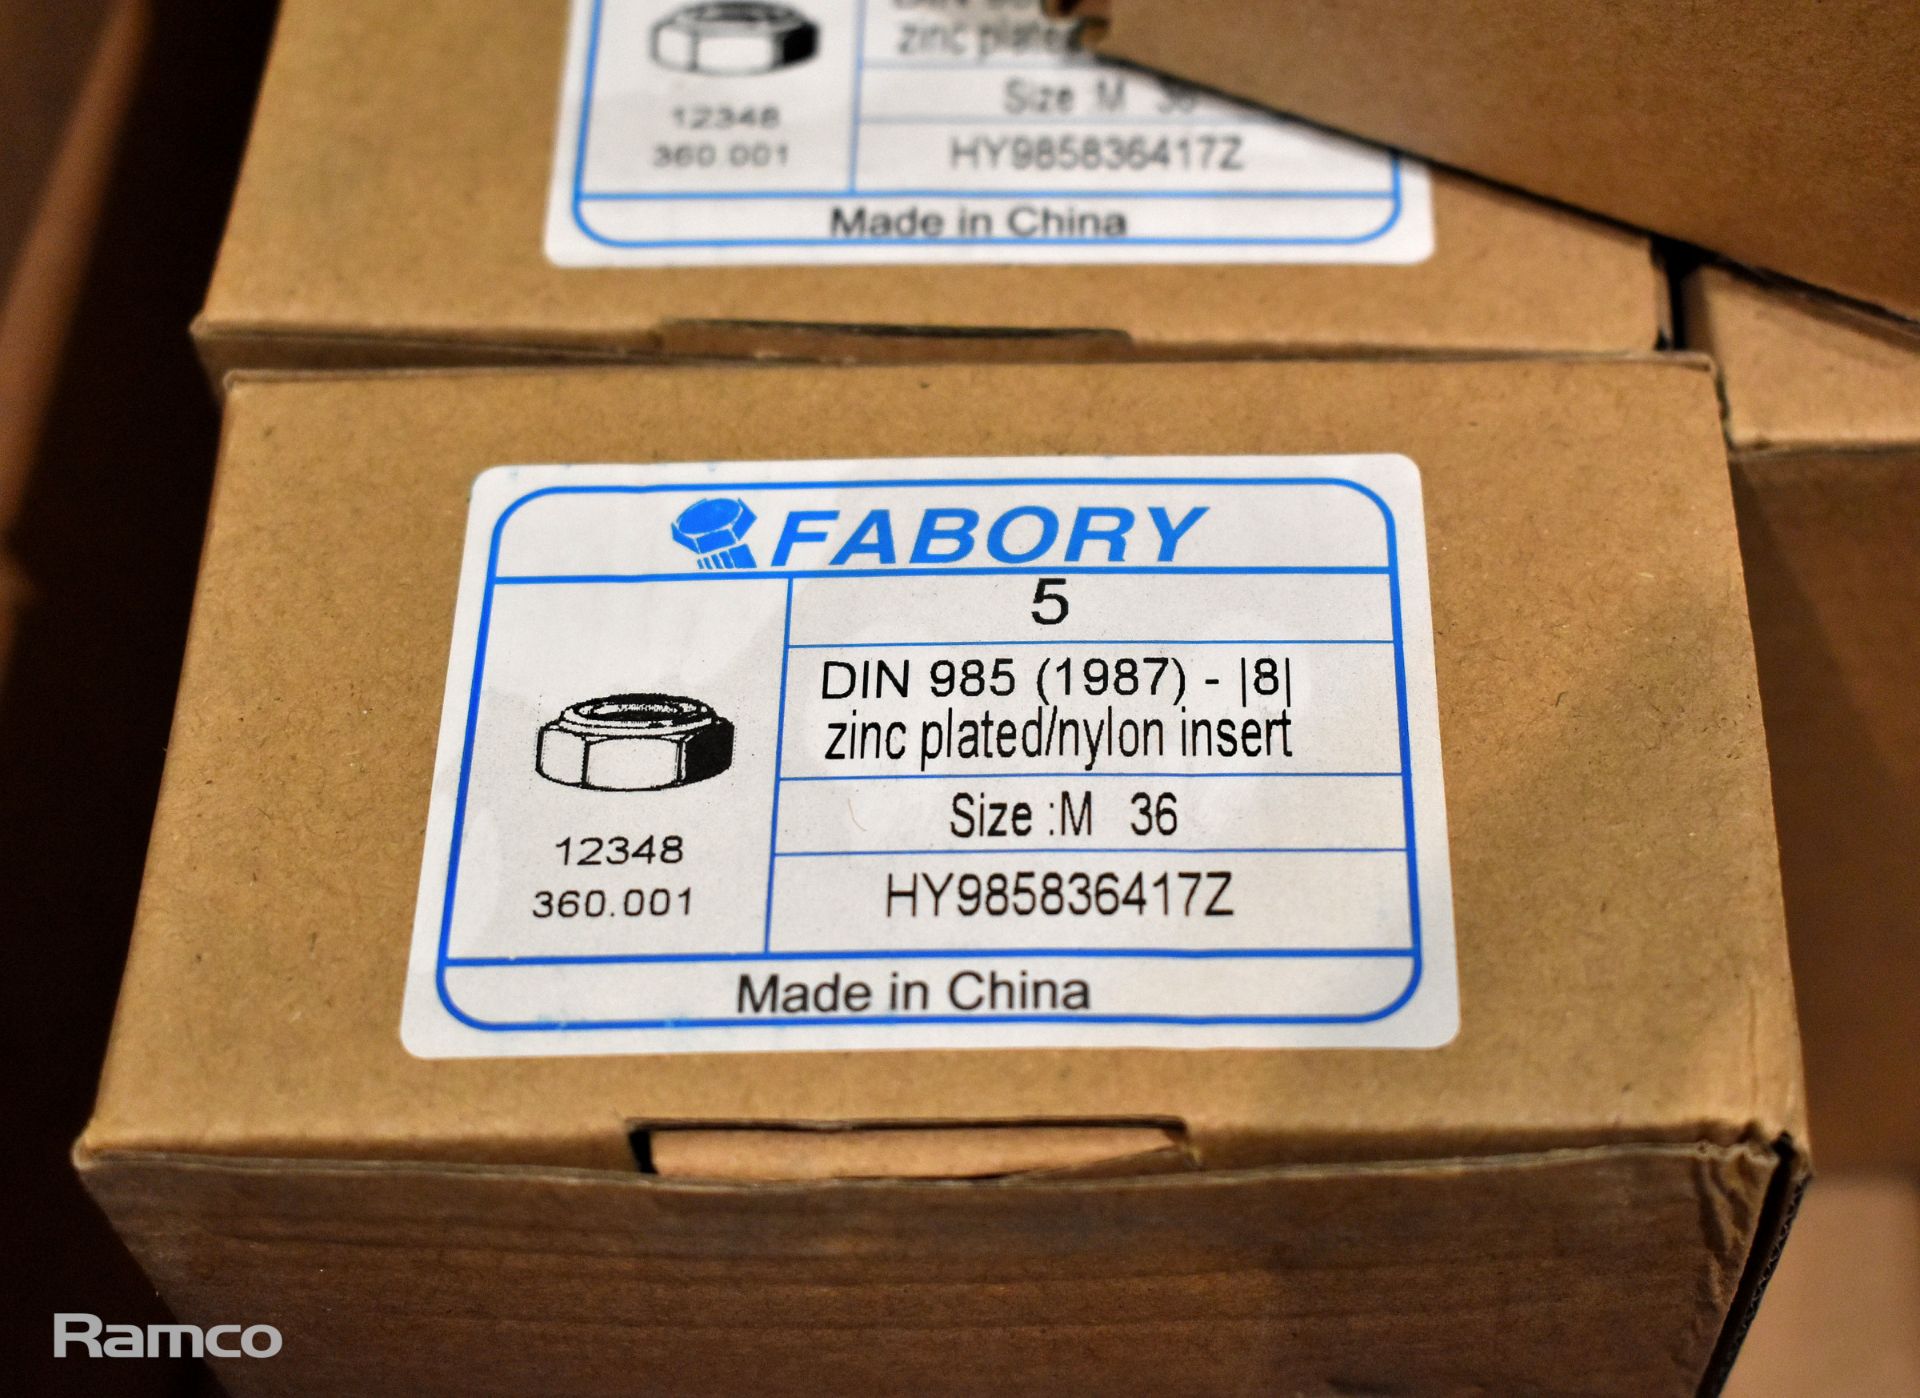 Fabory 36 mm nylon insert locking nuts - 1 box - 6 packs - 5 nuts per pack - Image 2 of 3